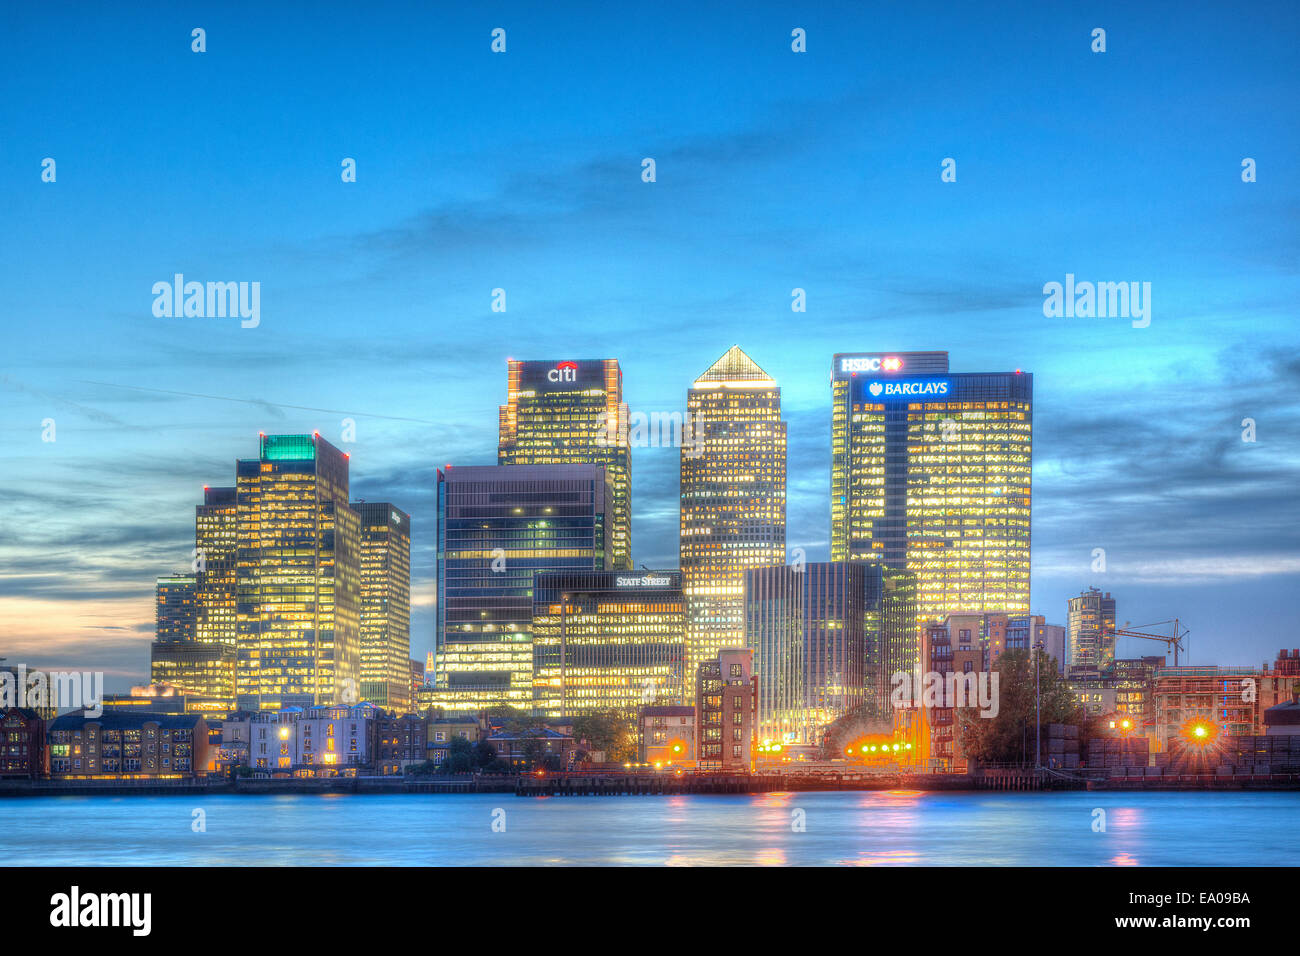 Canary Wharf, London financial district Foto Stock